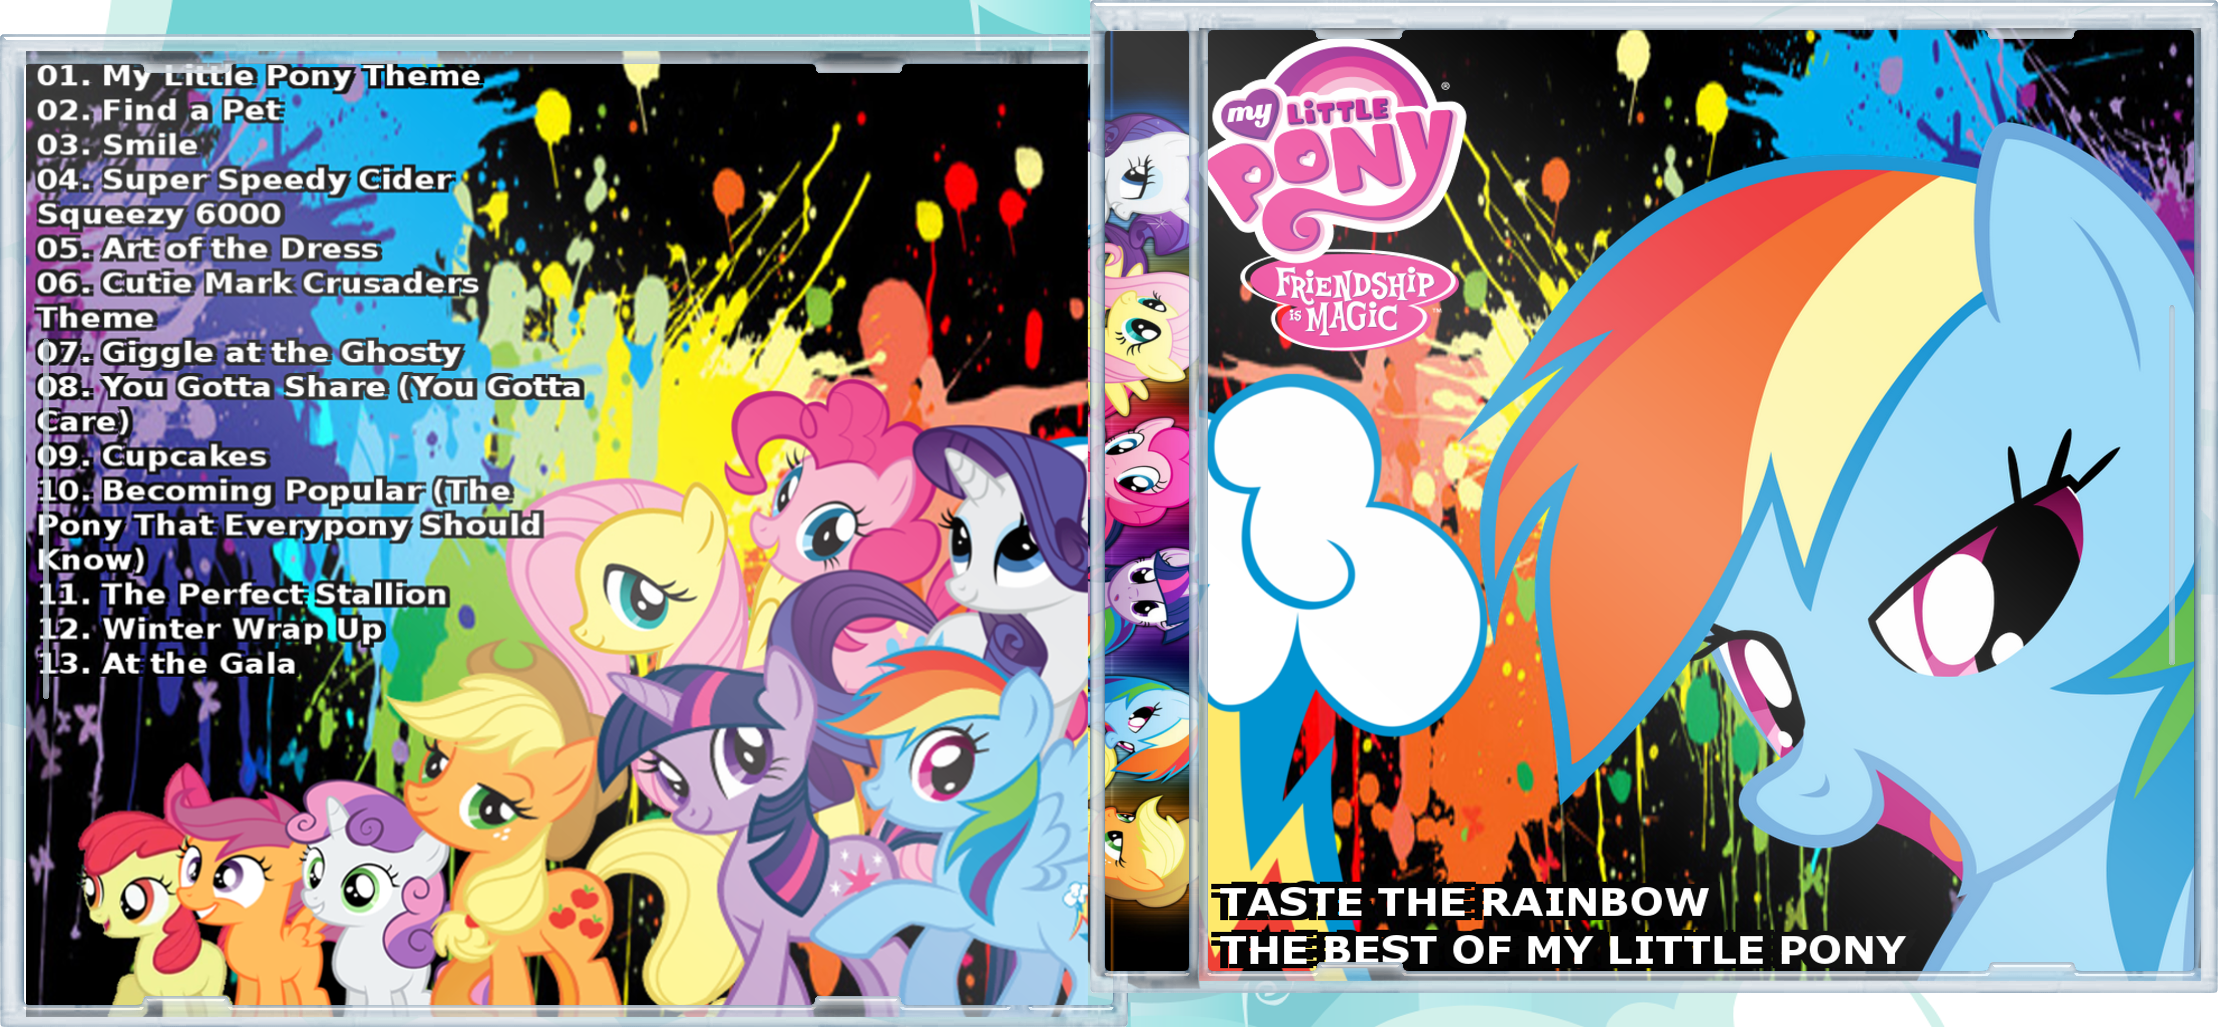 Taste the Rainbow: The Best of My Little Pony box cover